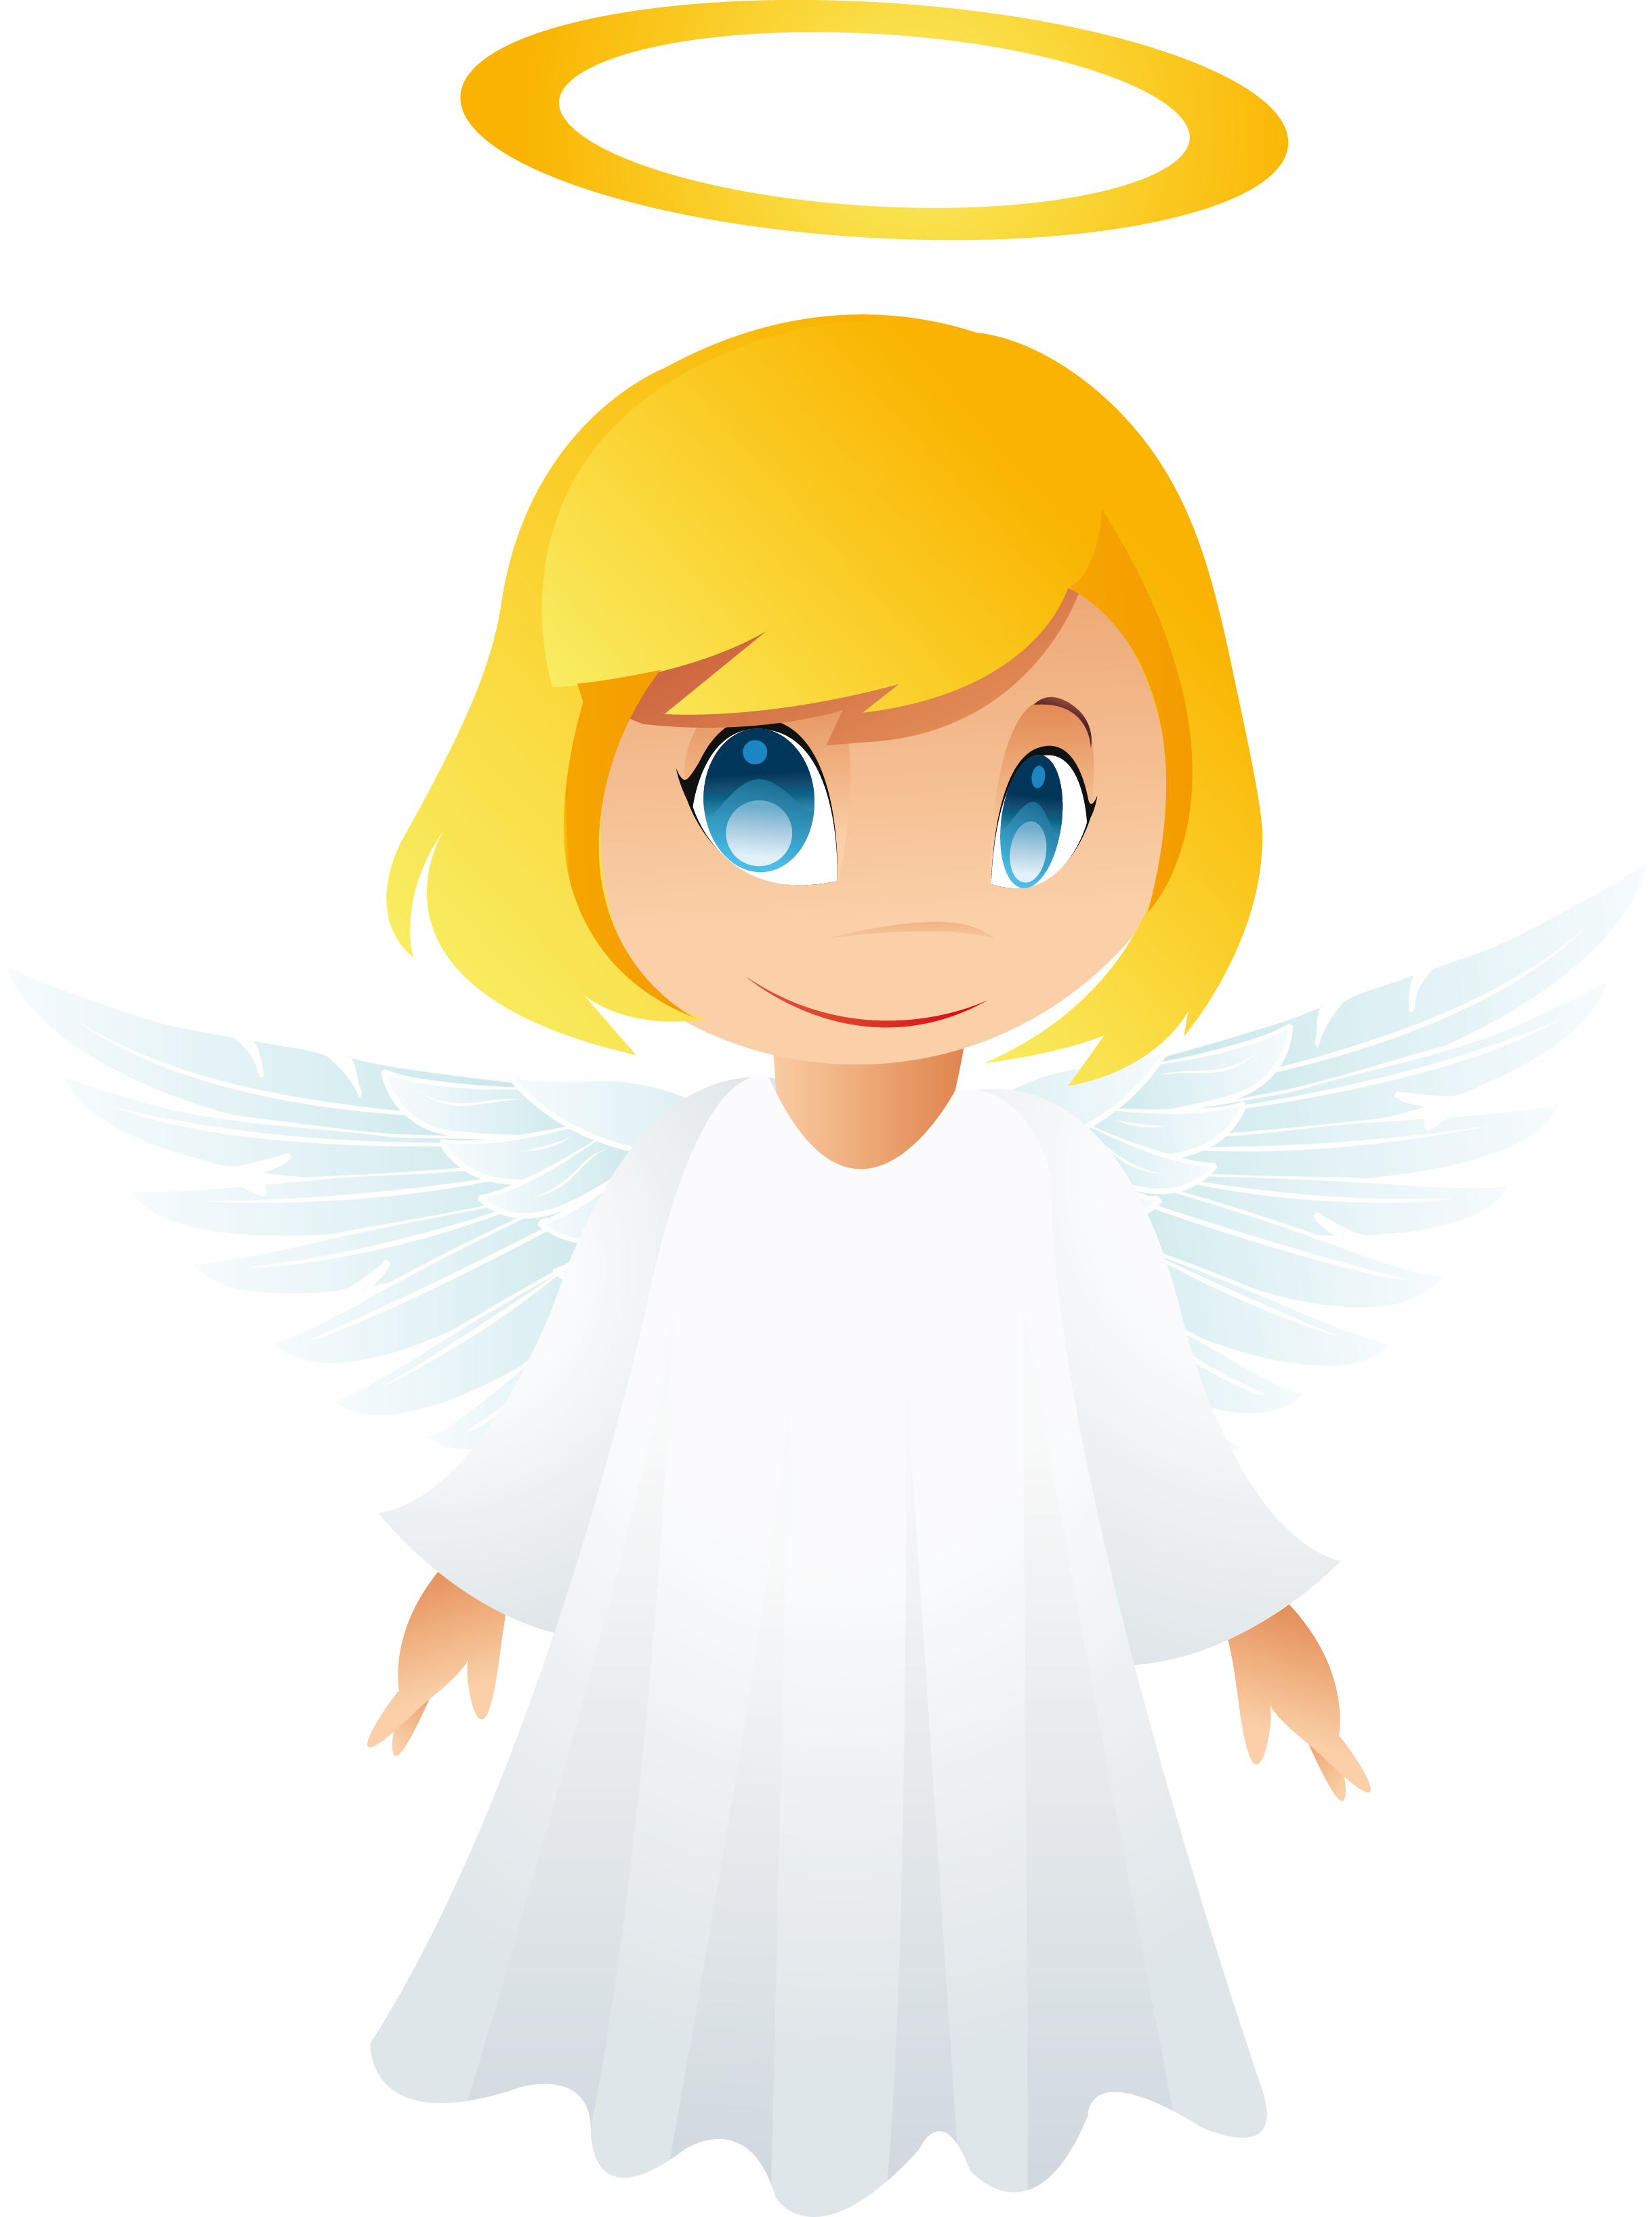 Angel clipart free graphics o - Angel Clipart Free